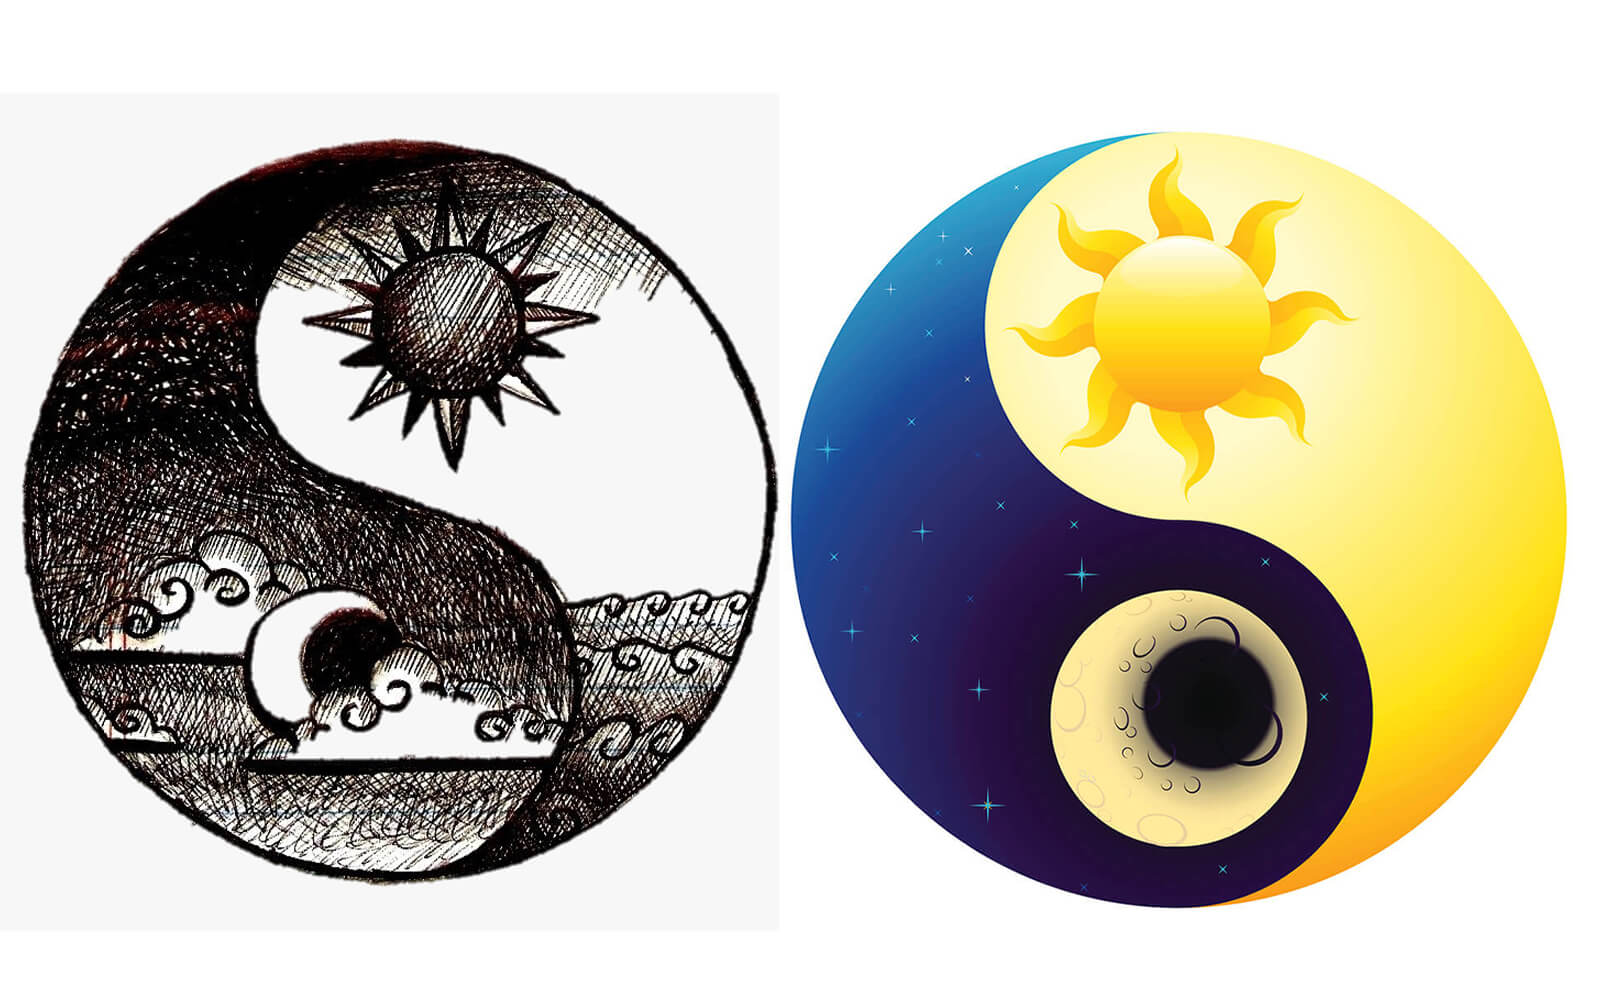 meaning of the dots in yin and yang symbol